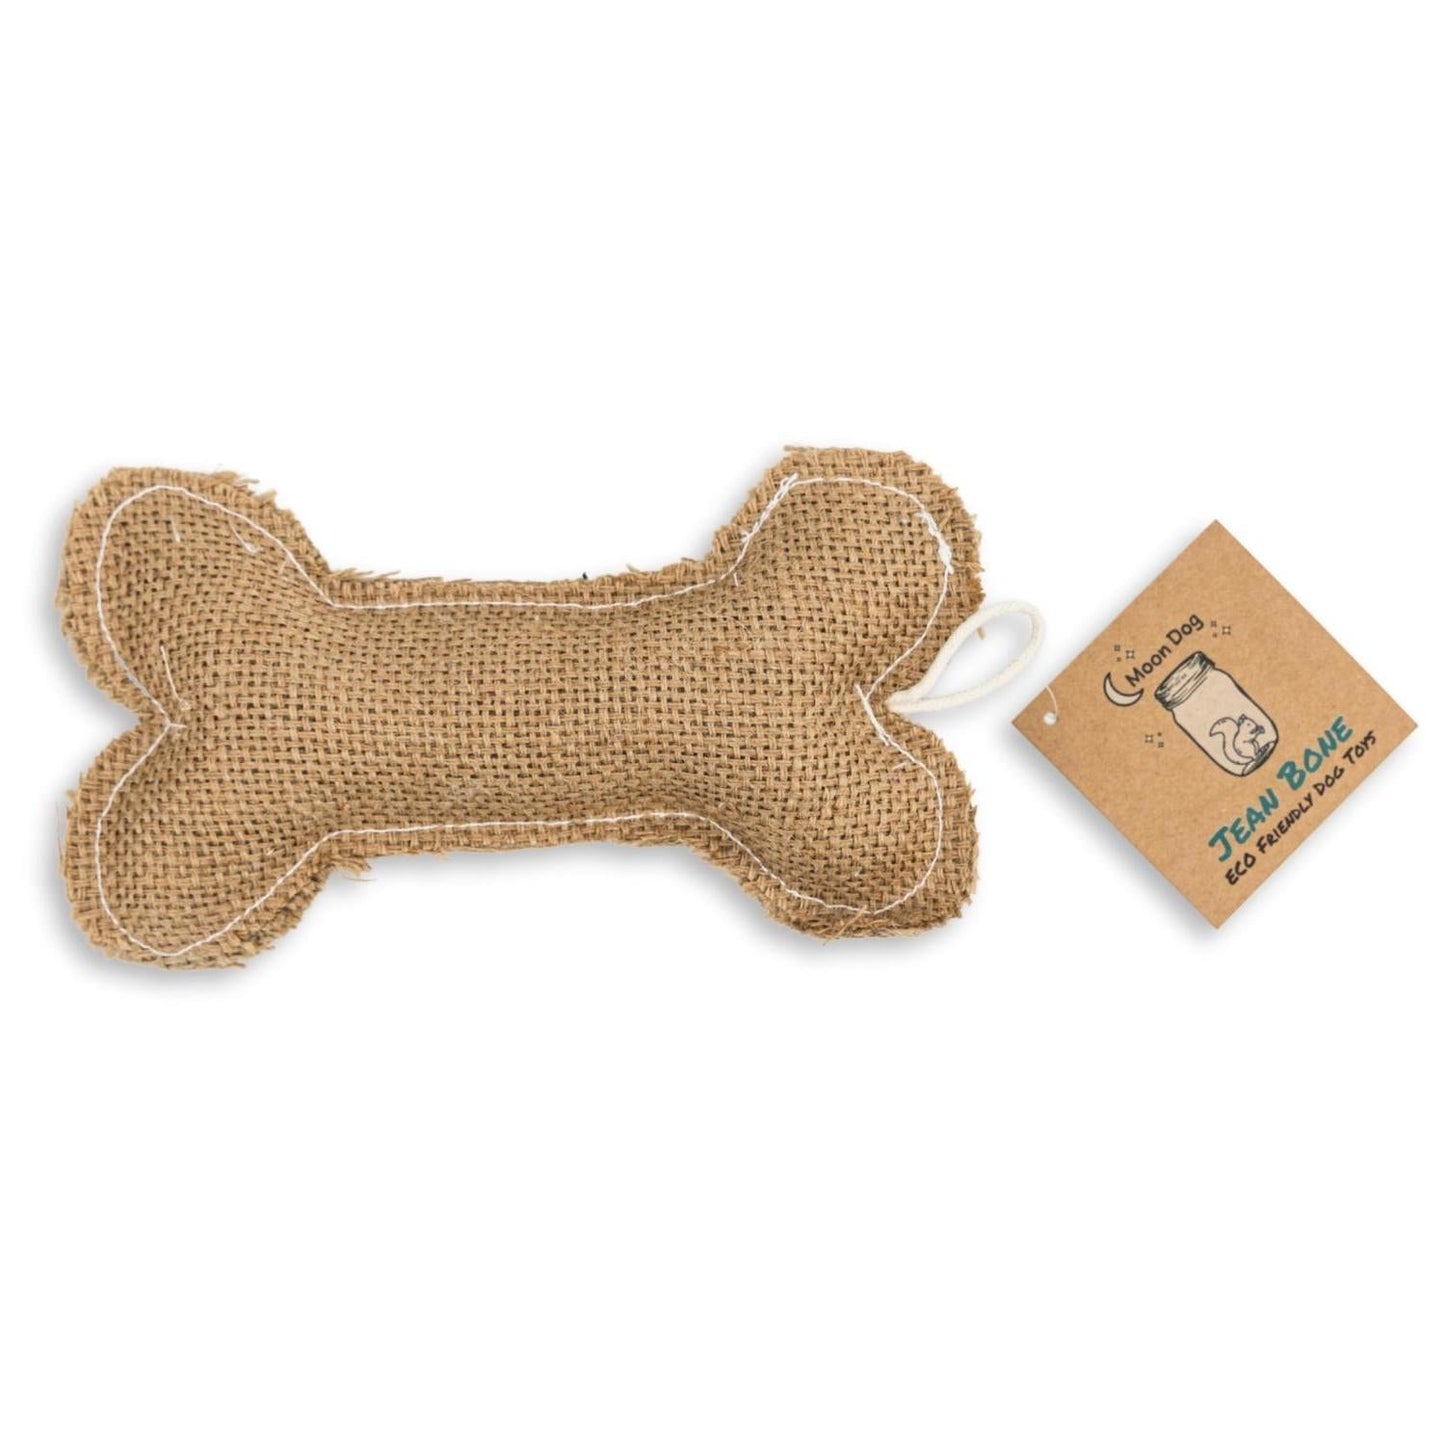 Sustainable Jean Leather-Jute Bone Pillow Dog Chew Toy-4